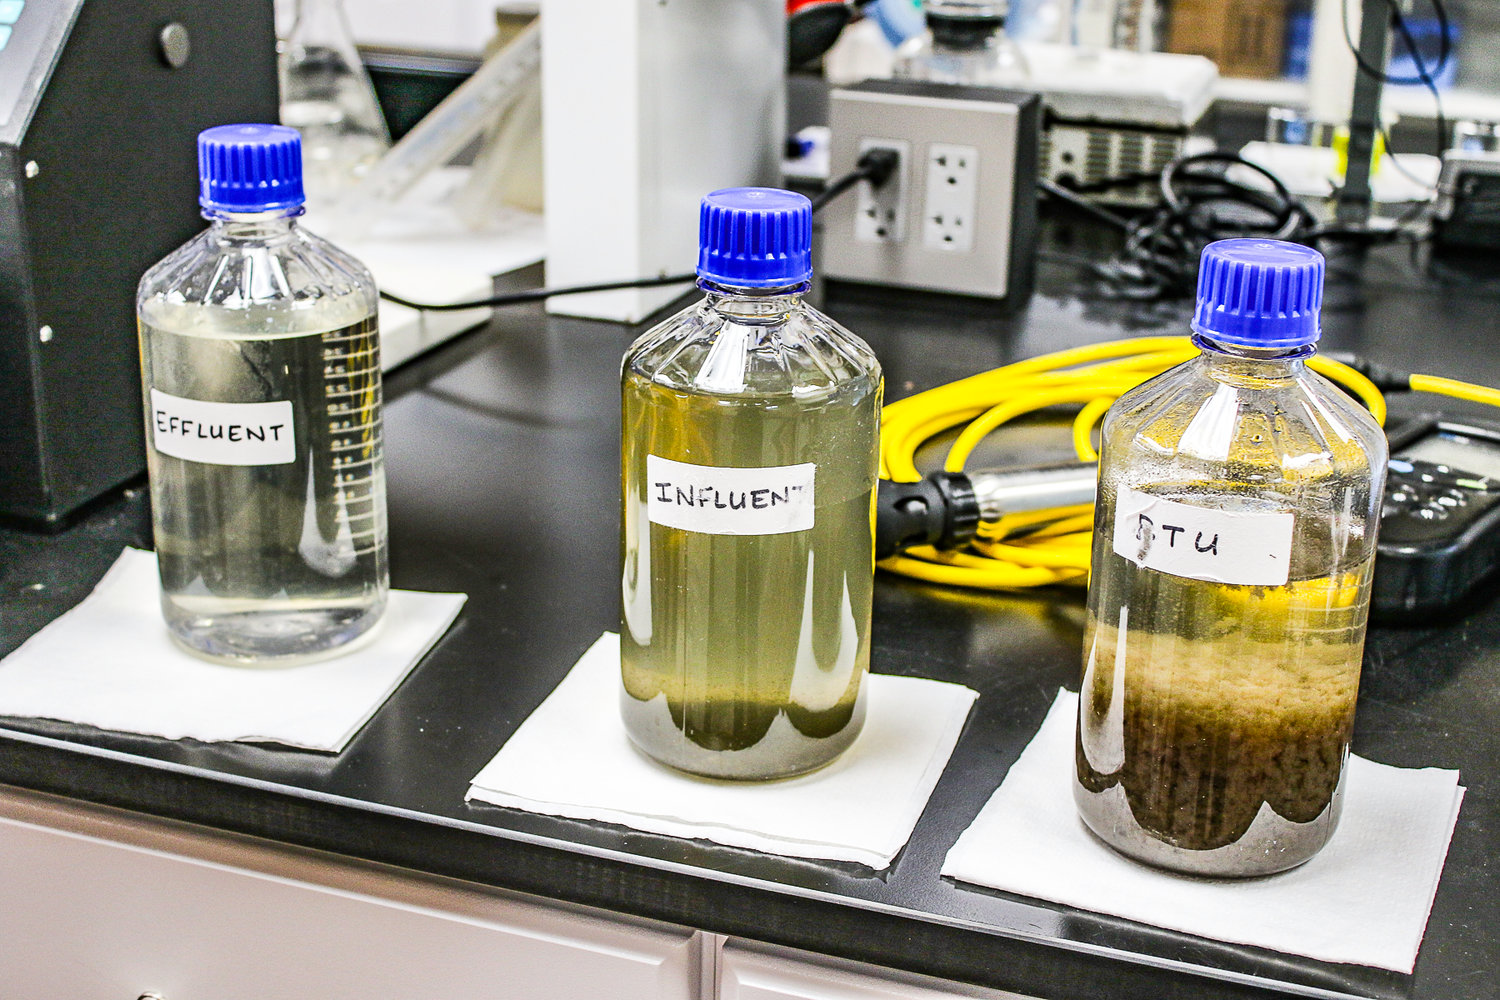 Curmode showed examples of stages of treatment in the on-site laboratory. At right, BTU or Biological Treatment Units, in the form of bacteria are mixed with waste water. Center, Influent is the waste water as it come in to the plant. Left, Effluent is what is released into the waterway.